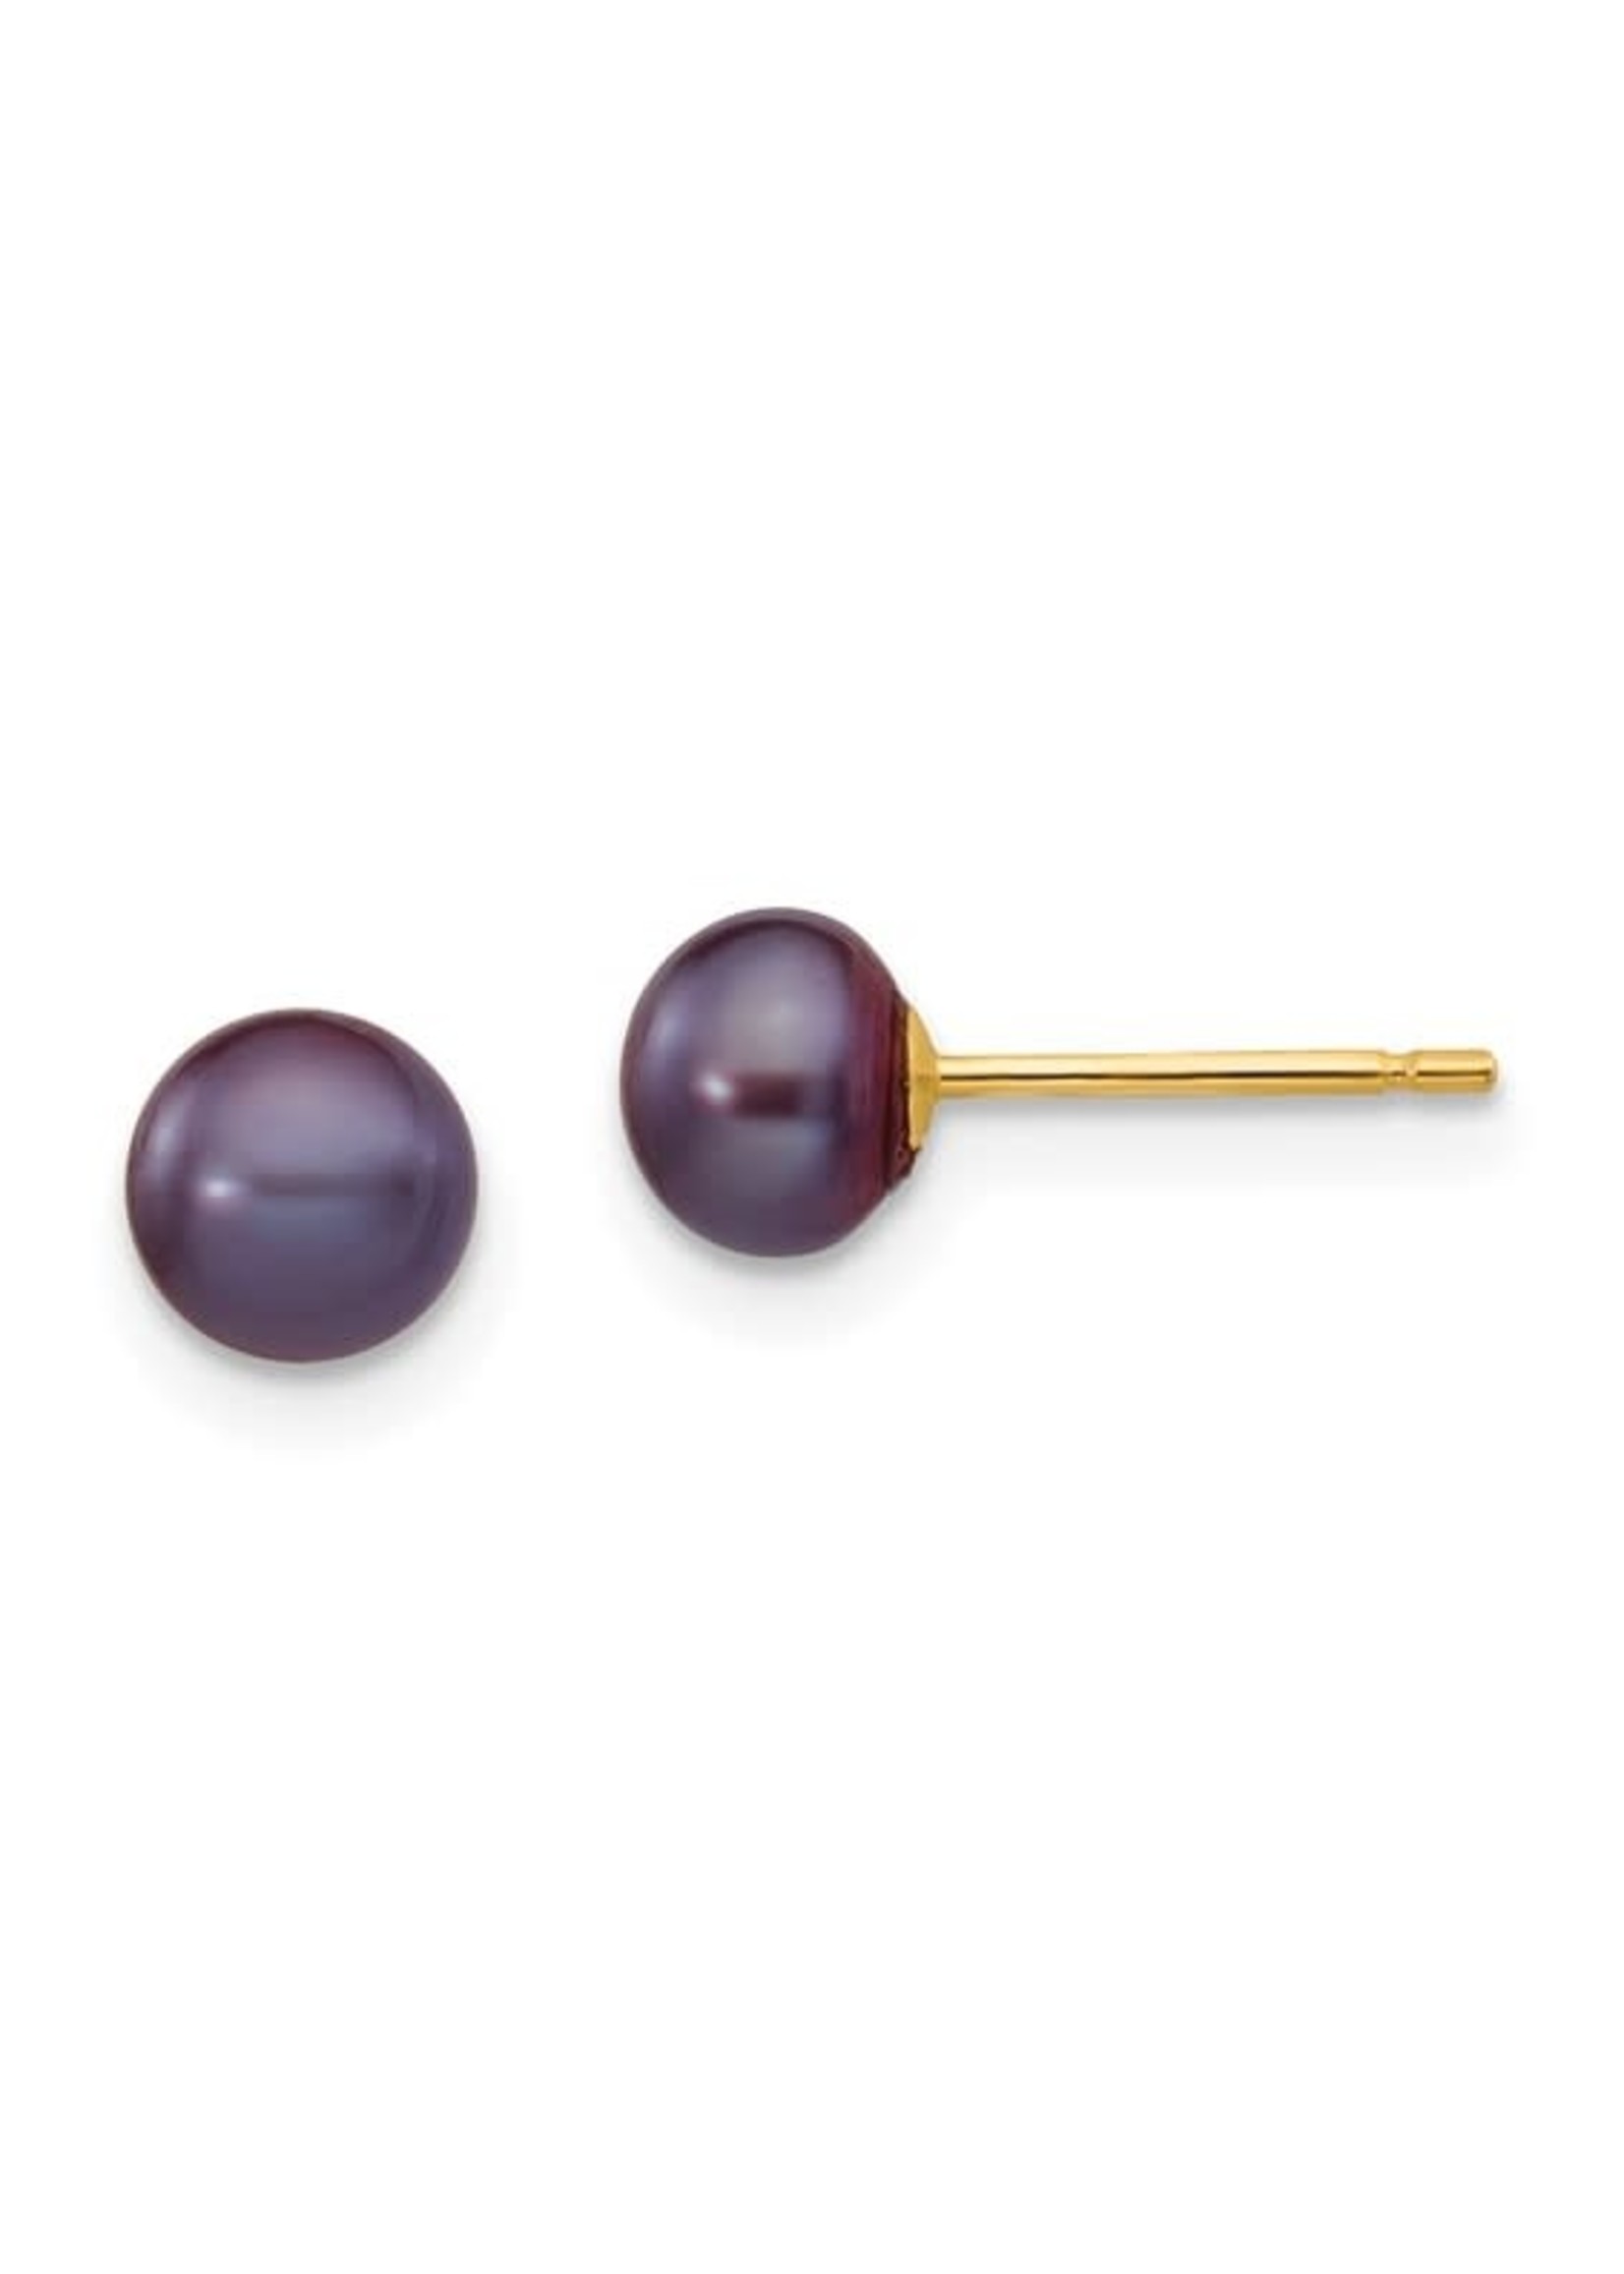 Quality Gold Inc. 14k 5-6mm Black Button Freshwater Cultured Pearl Stud Earrings